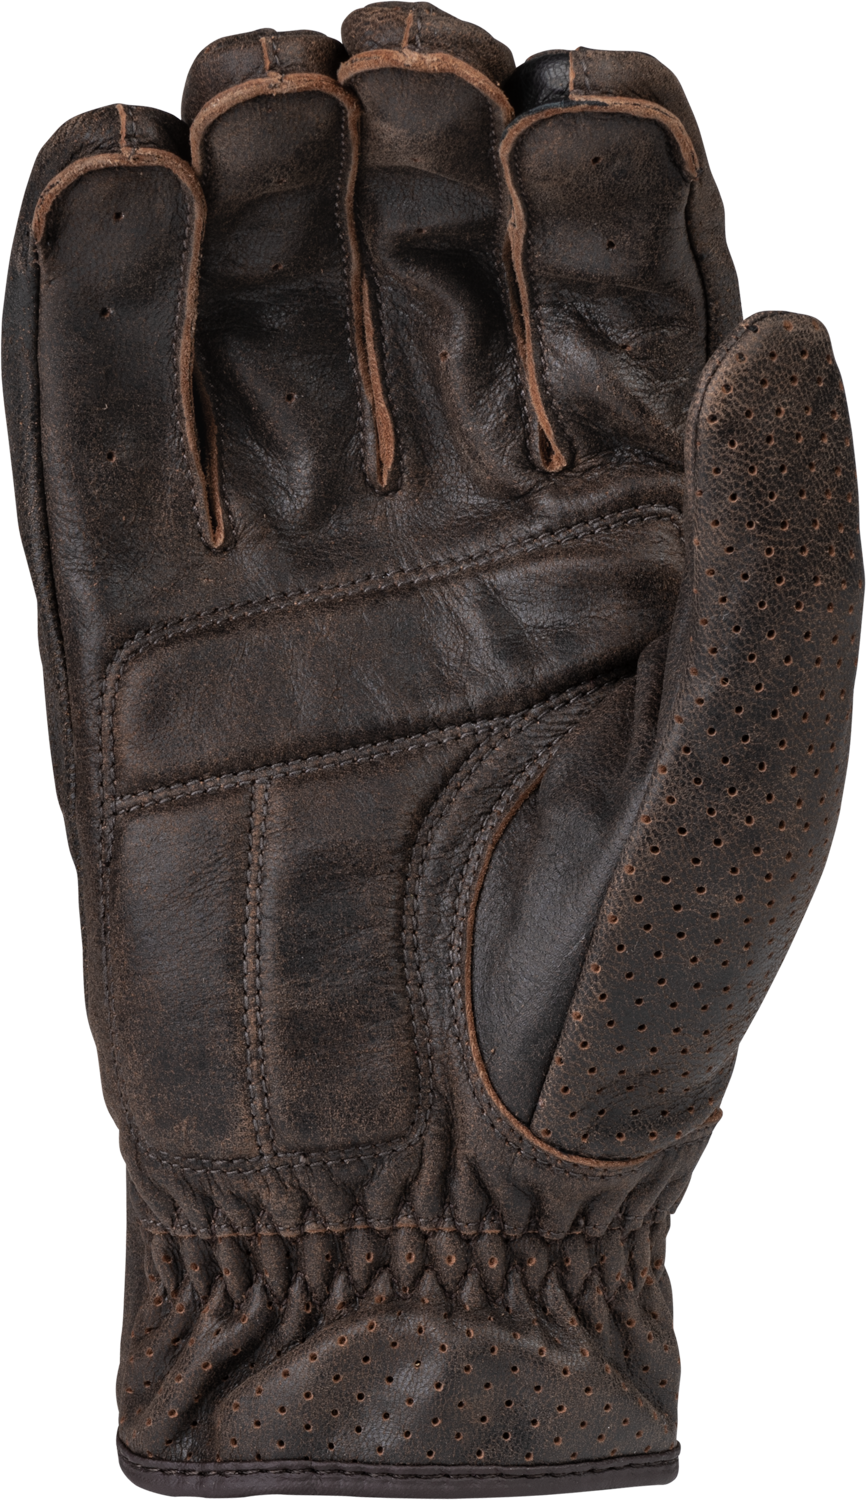 Jab Perforated Gloves Brown 5x